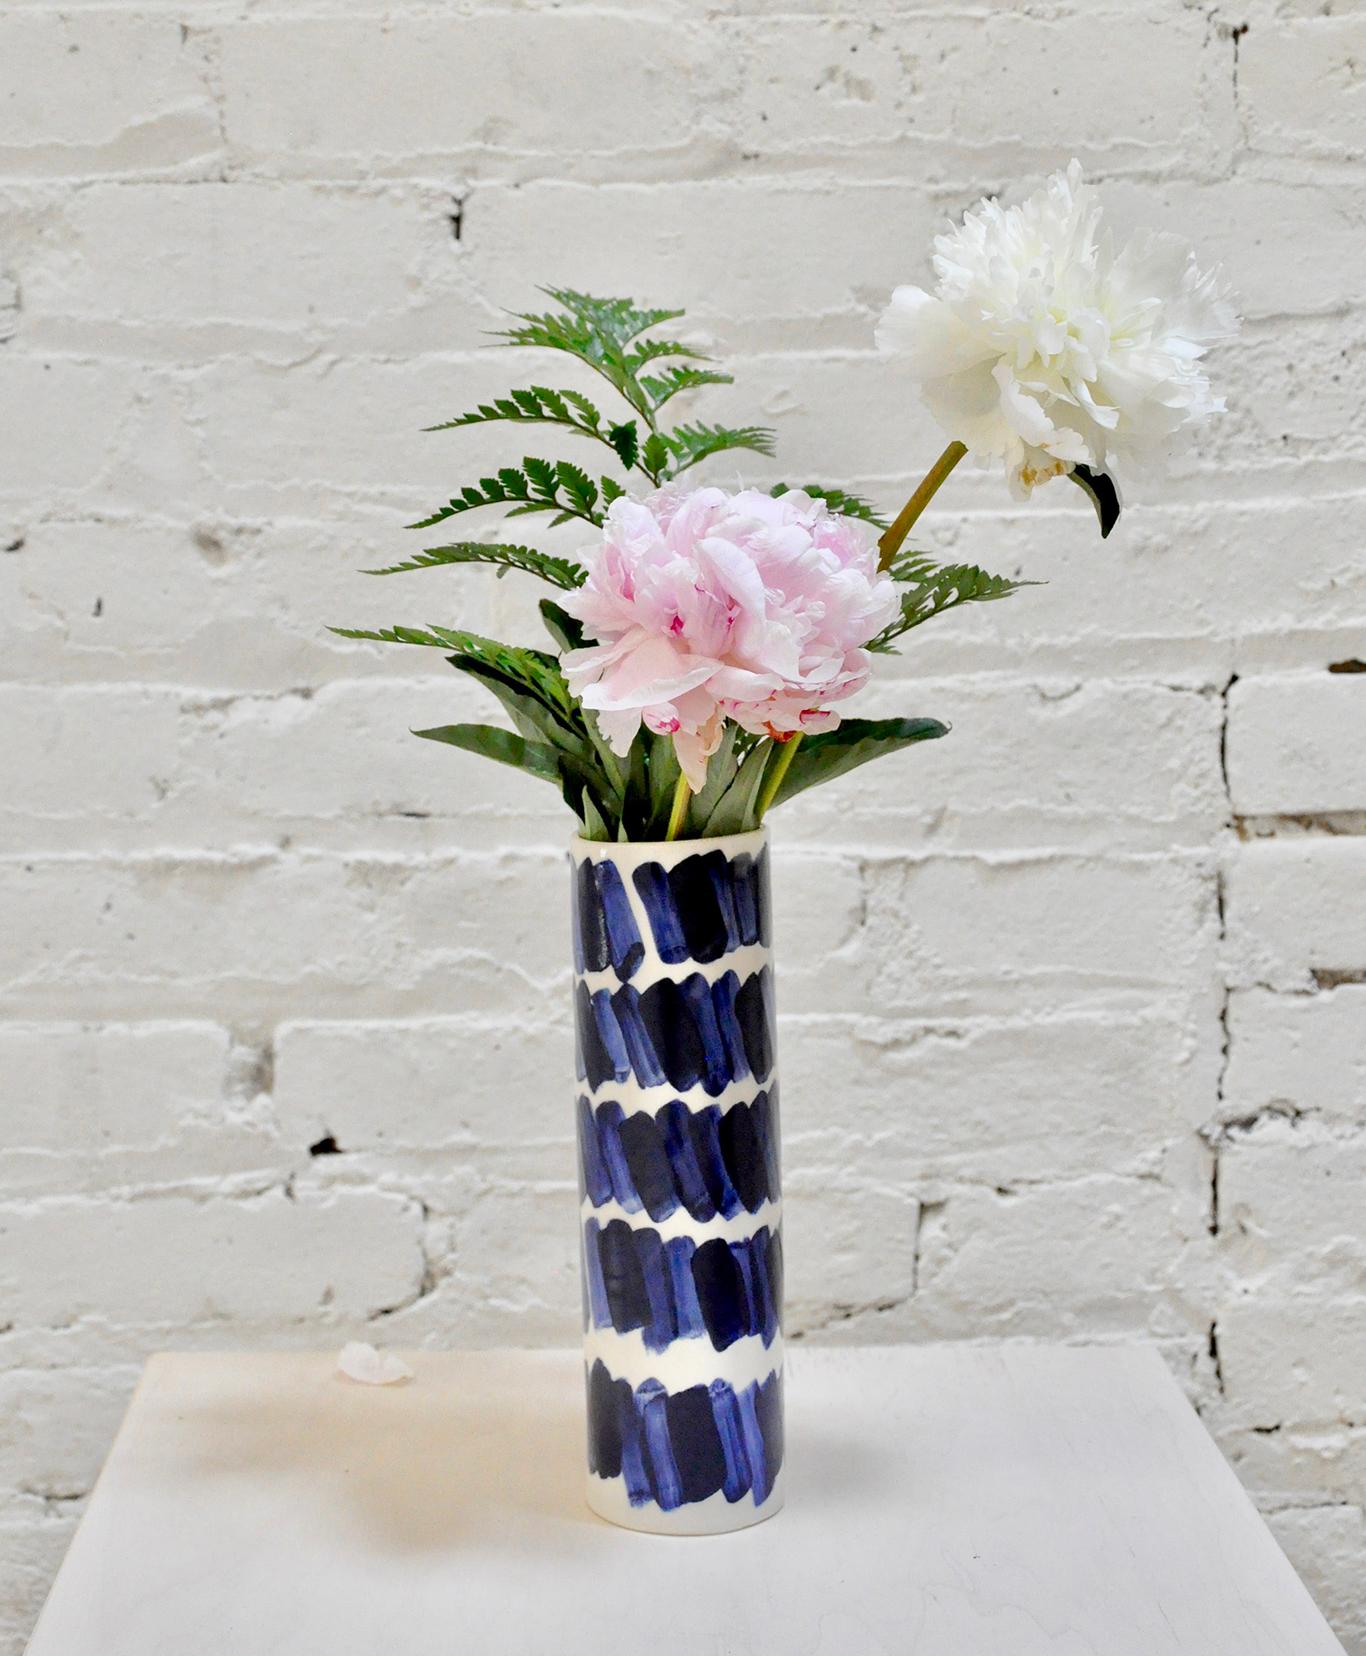 Hand-Crafted Pair of Rhythm Vases by Isabel Halley, in White Porcelain with Cobalt Glaze